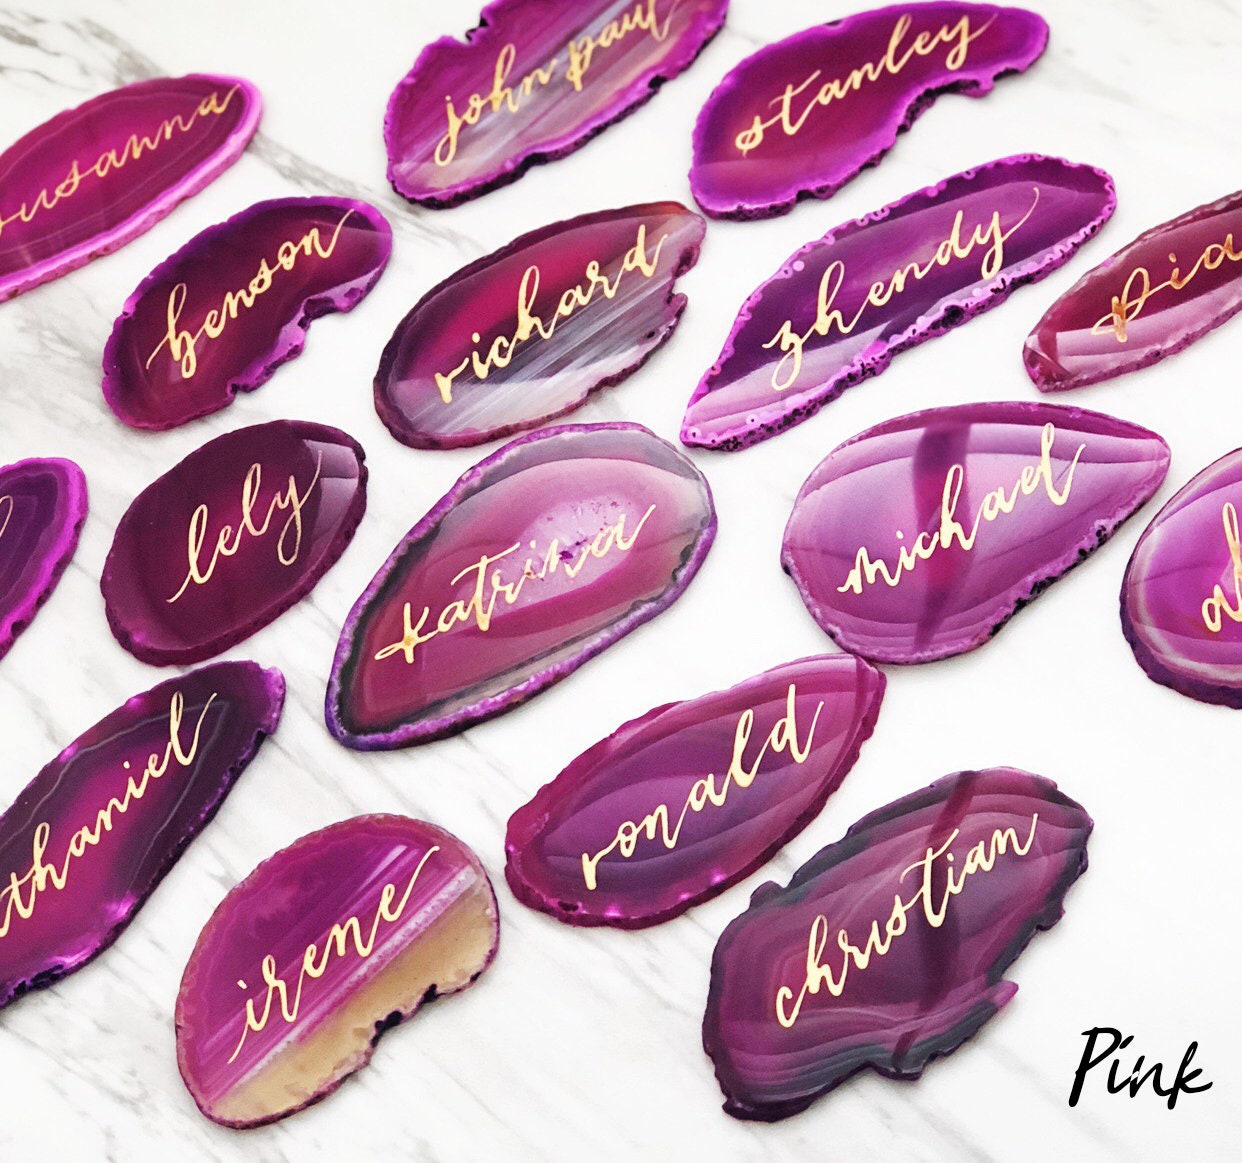 3" - 3.5" EXTRA LARGE Pink Agate Slice Calligraphy Name Place Cards | Agate Calligraphy Name Cards